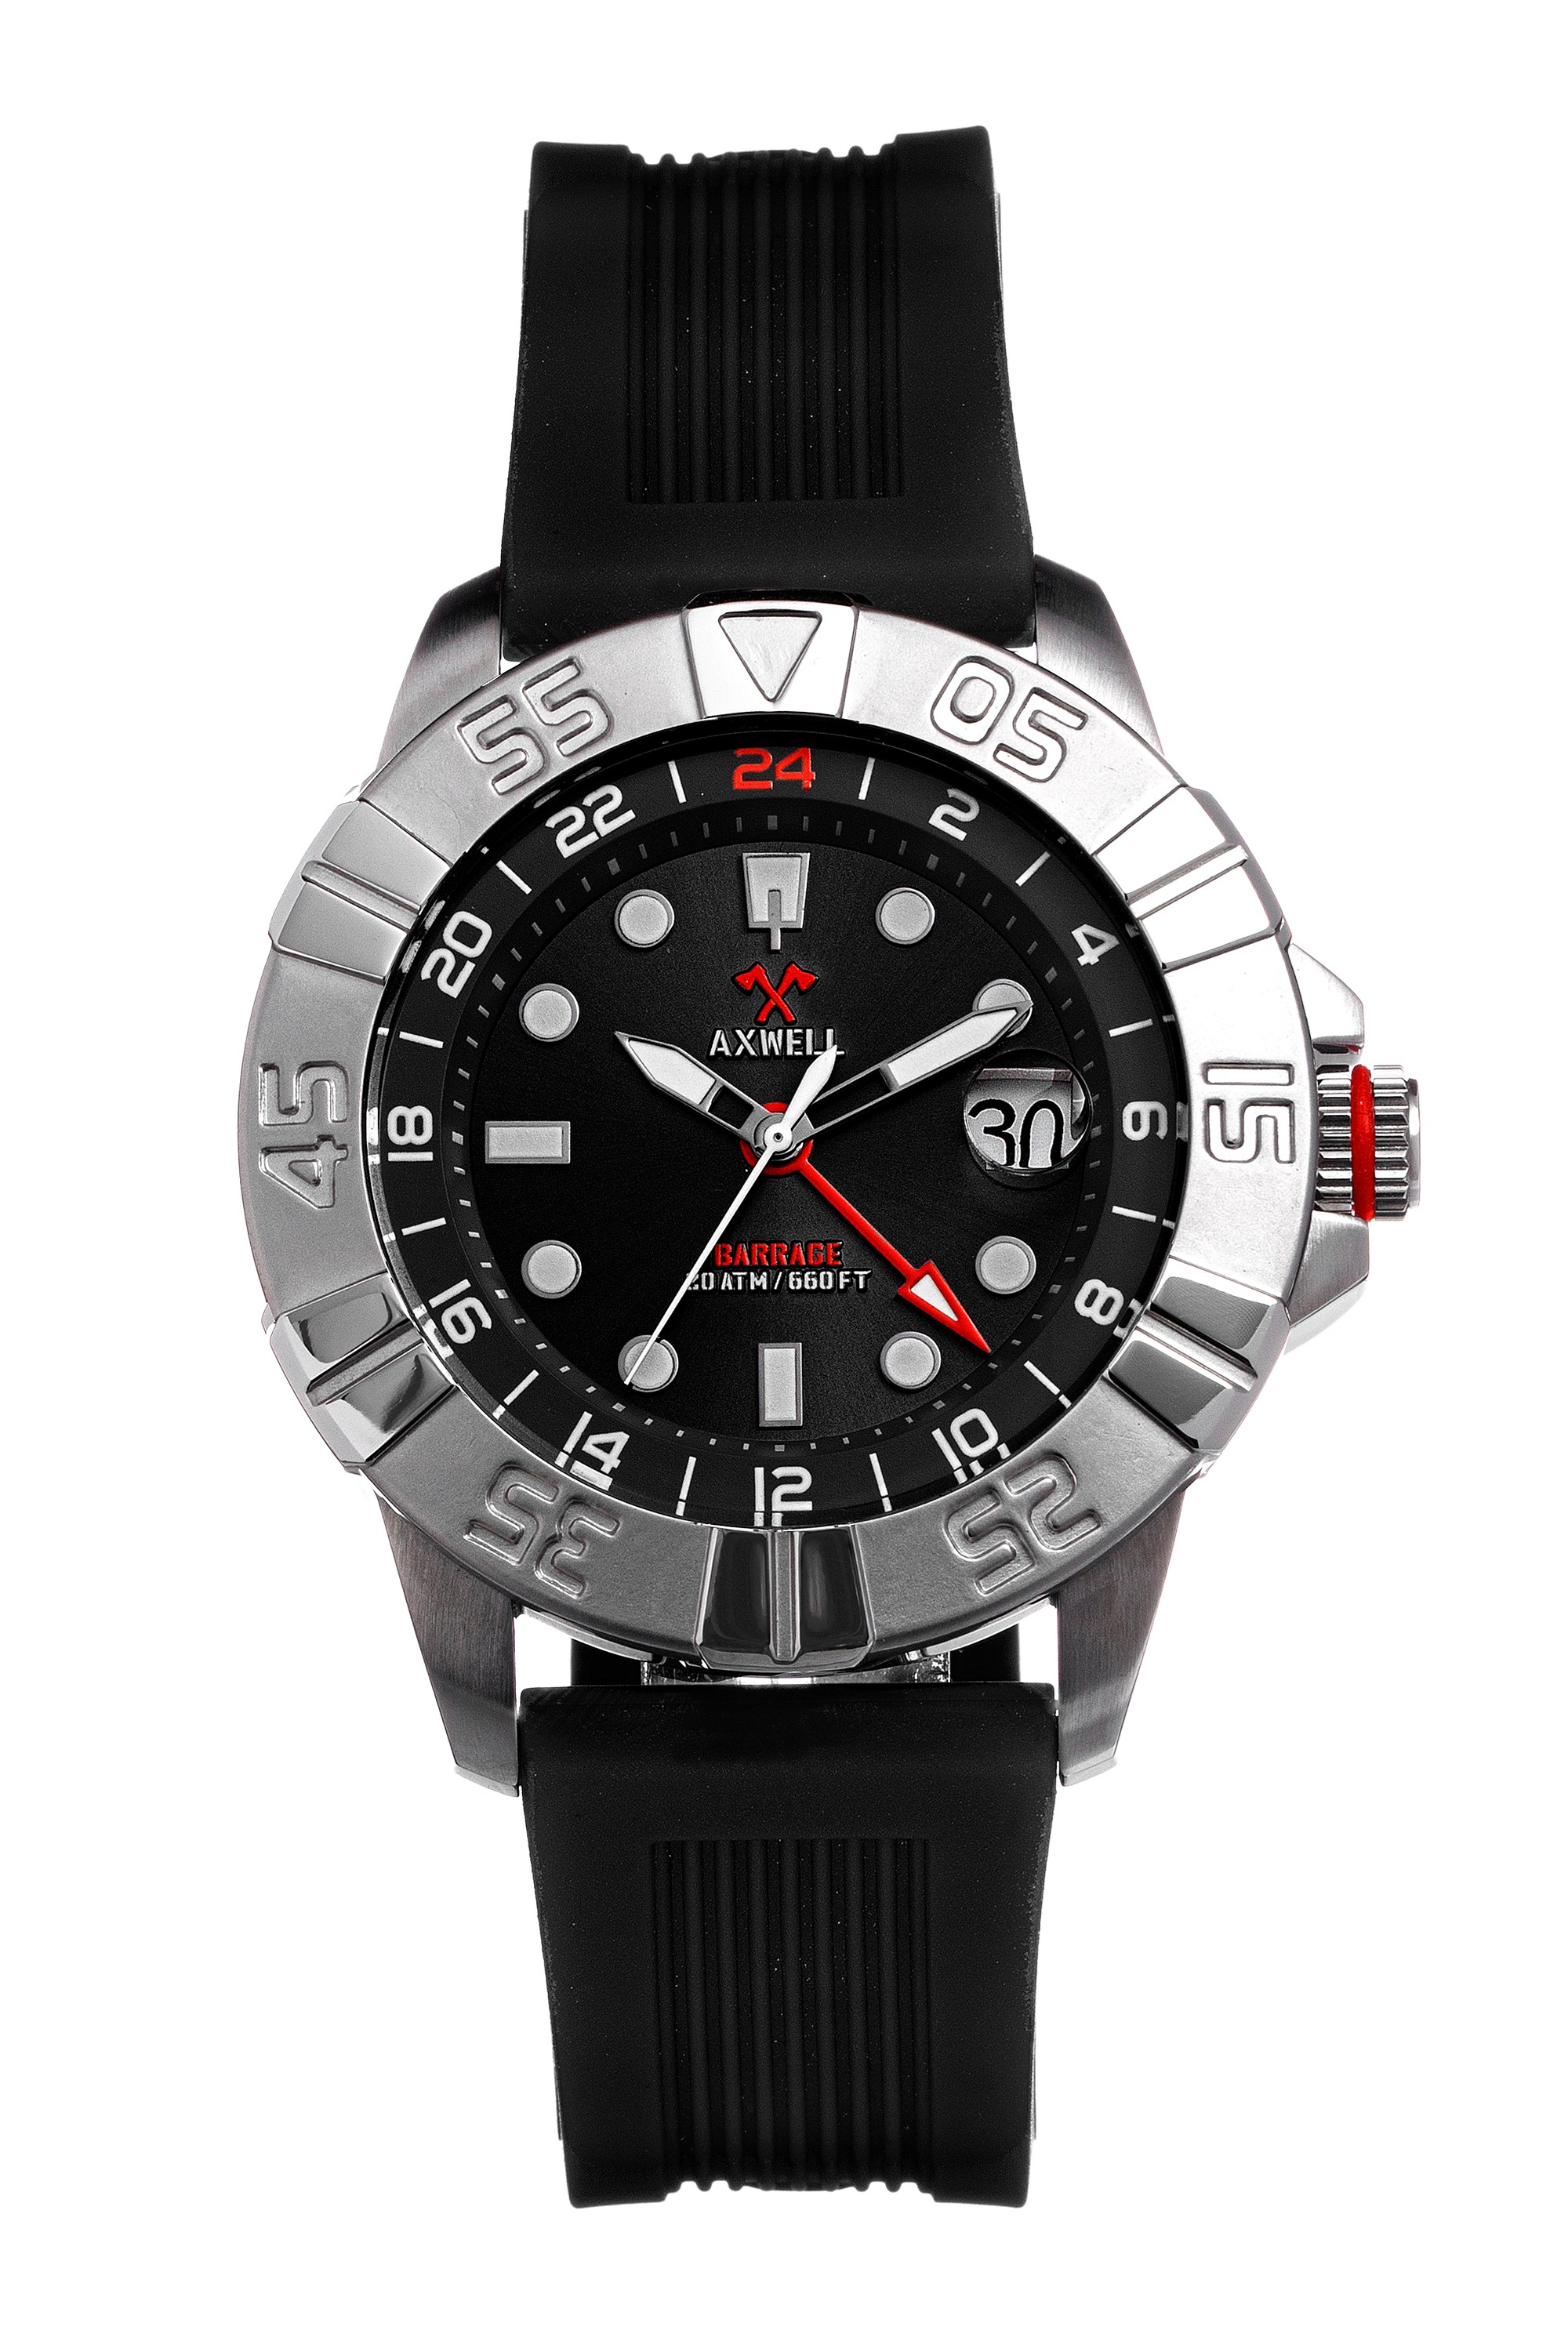 Barrage Rubber Strap Deep Diving Watch With Date -